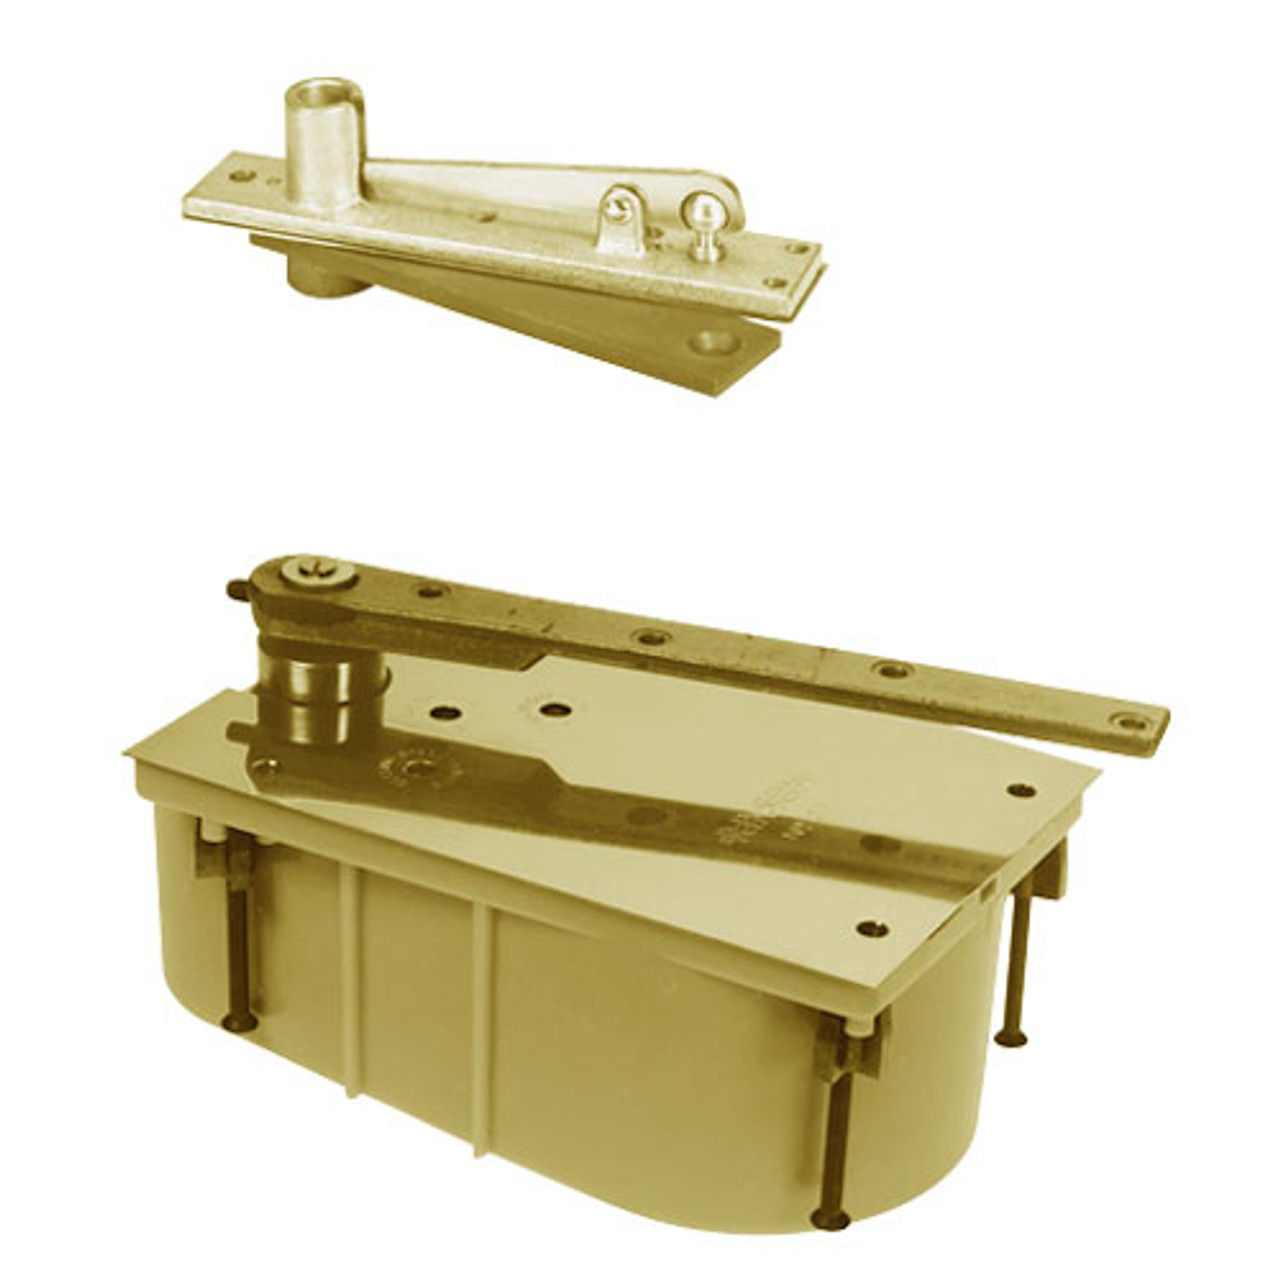 28-105S-554-LTP-LH-606 Rixson 28 Series Heavy Duty Single Acting Center Hung Floor Closer with Concealed Arm in Satin Brass Finish